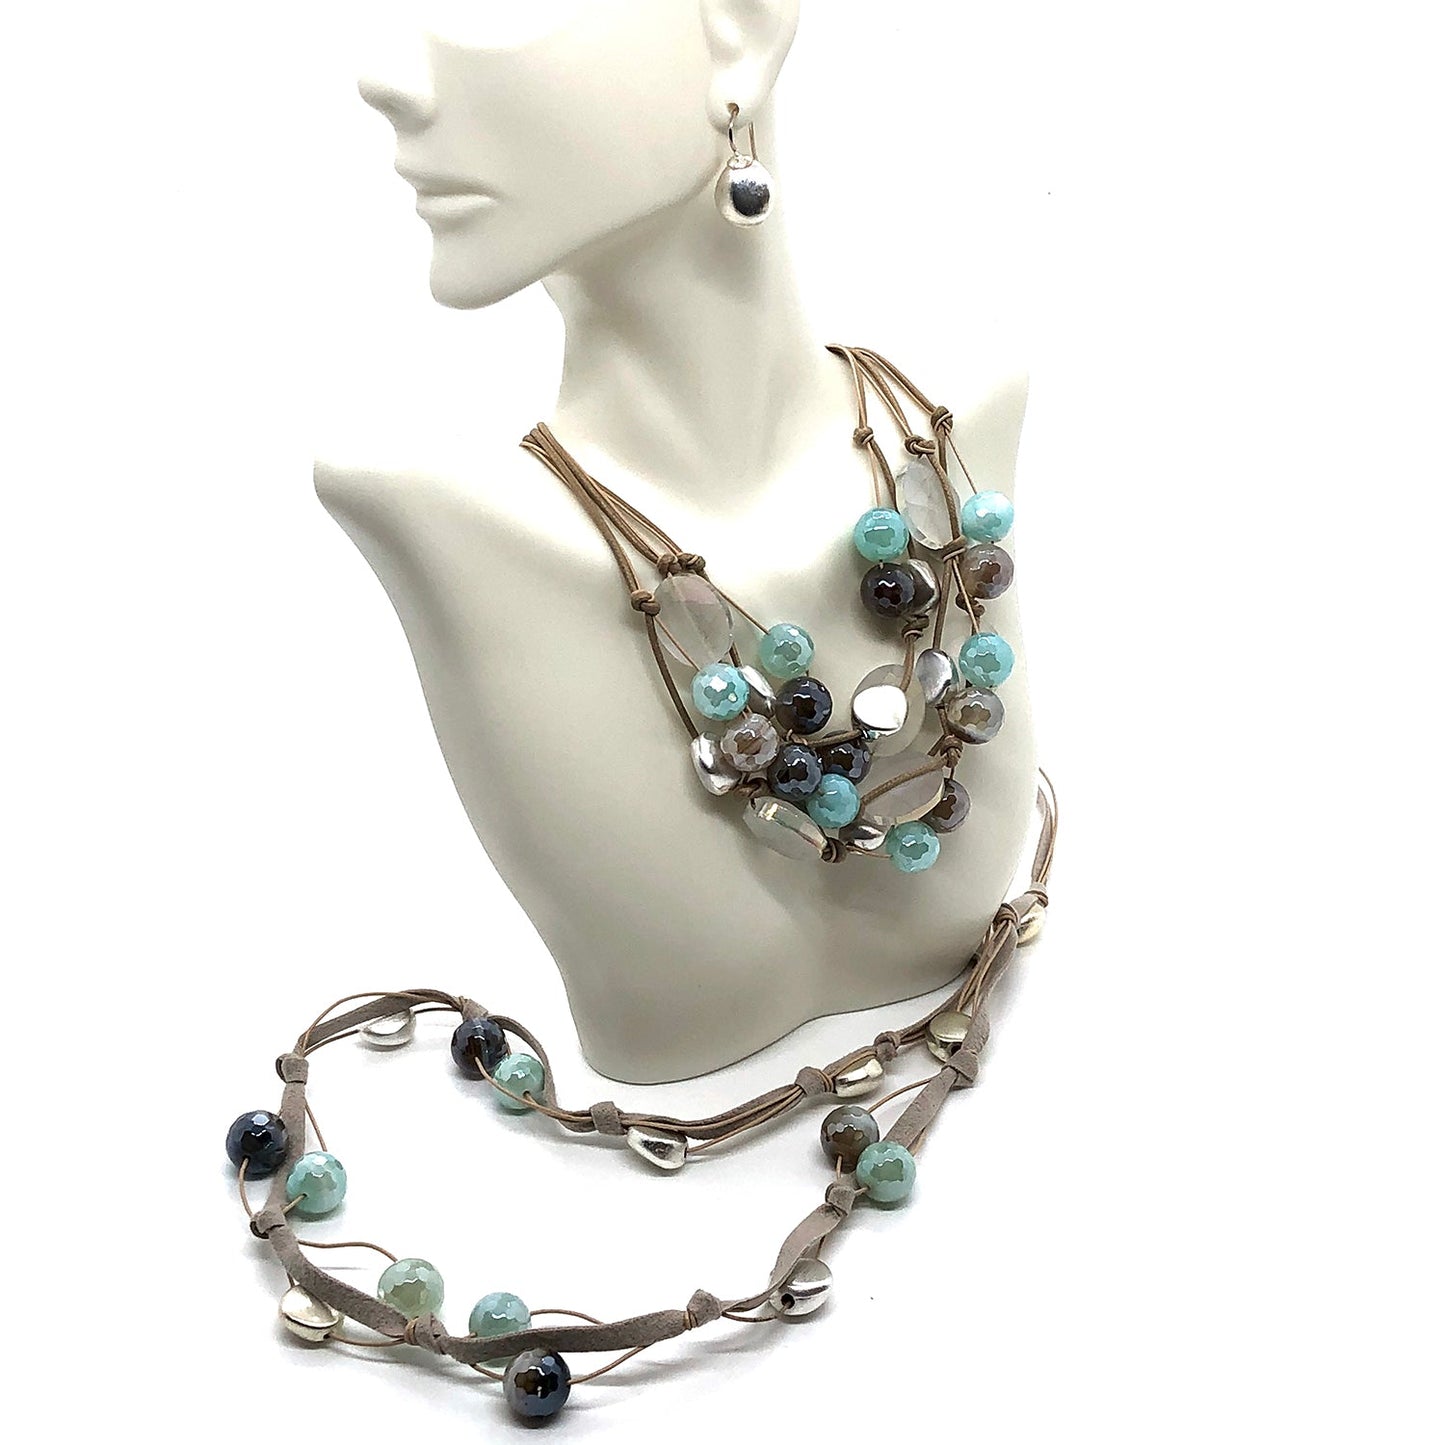 Aqua And Mocha Glazed Agate With Matte White Oval Crystal And Matte Silver Beads Putty Leather And Natural Linen 3 Strand Torsade Style Necklace And Layer Necklace